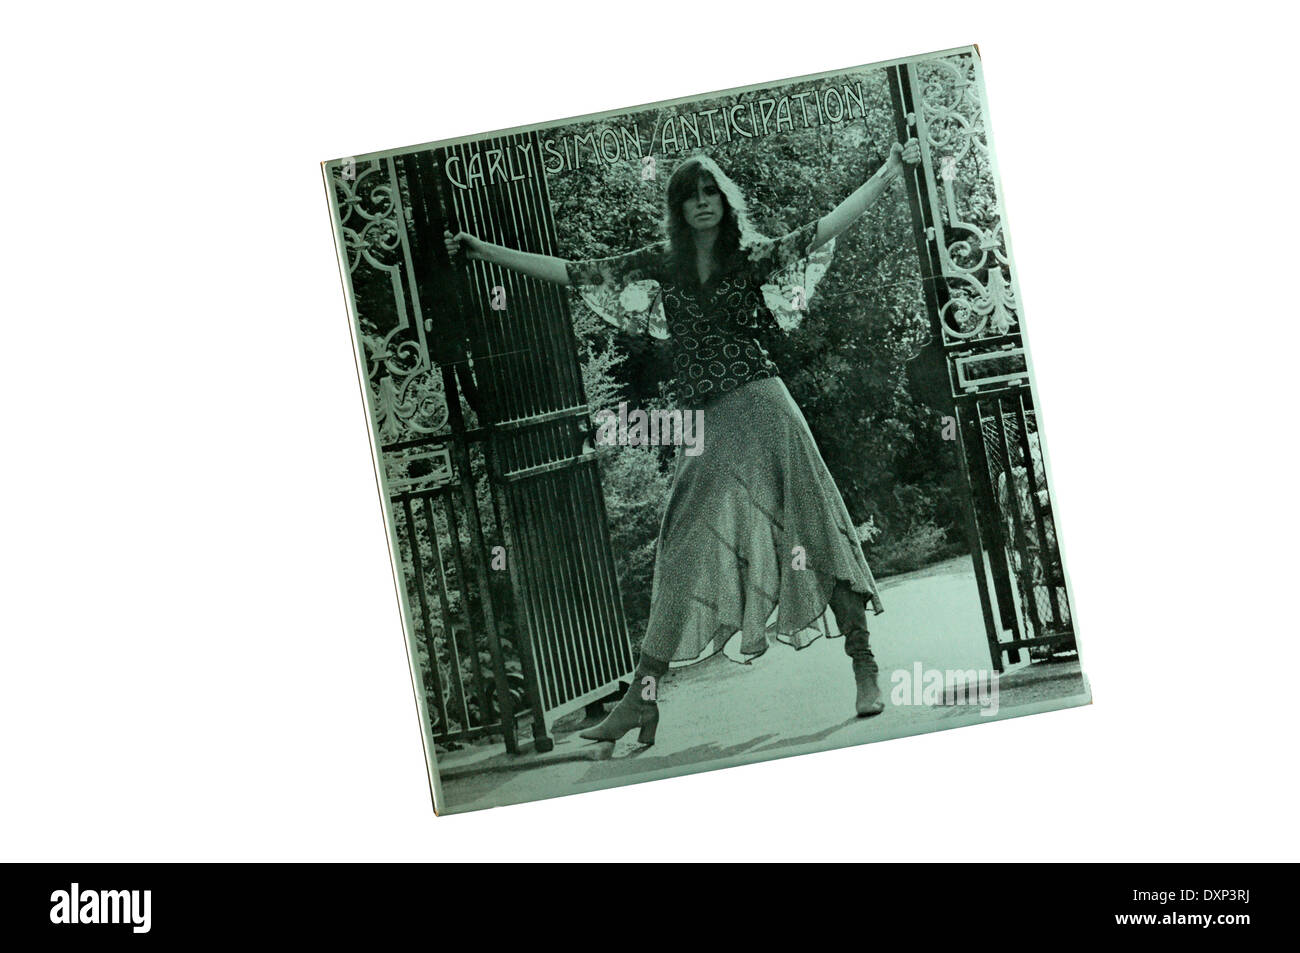 Anticipation was singer-songwriter Carly Simon's second studio album, released in 1971. Stock Photo